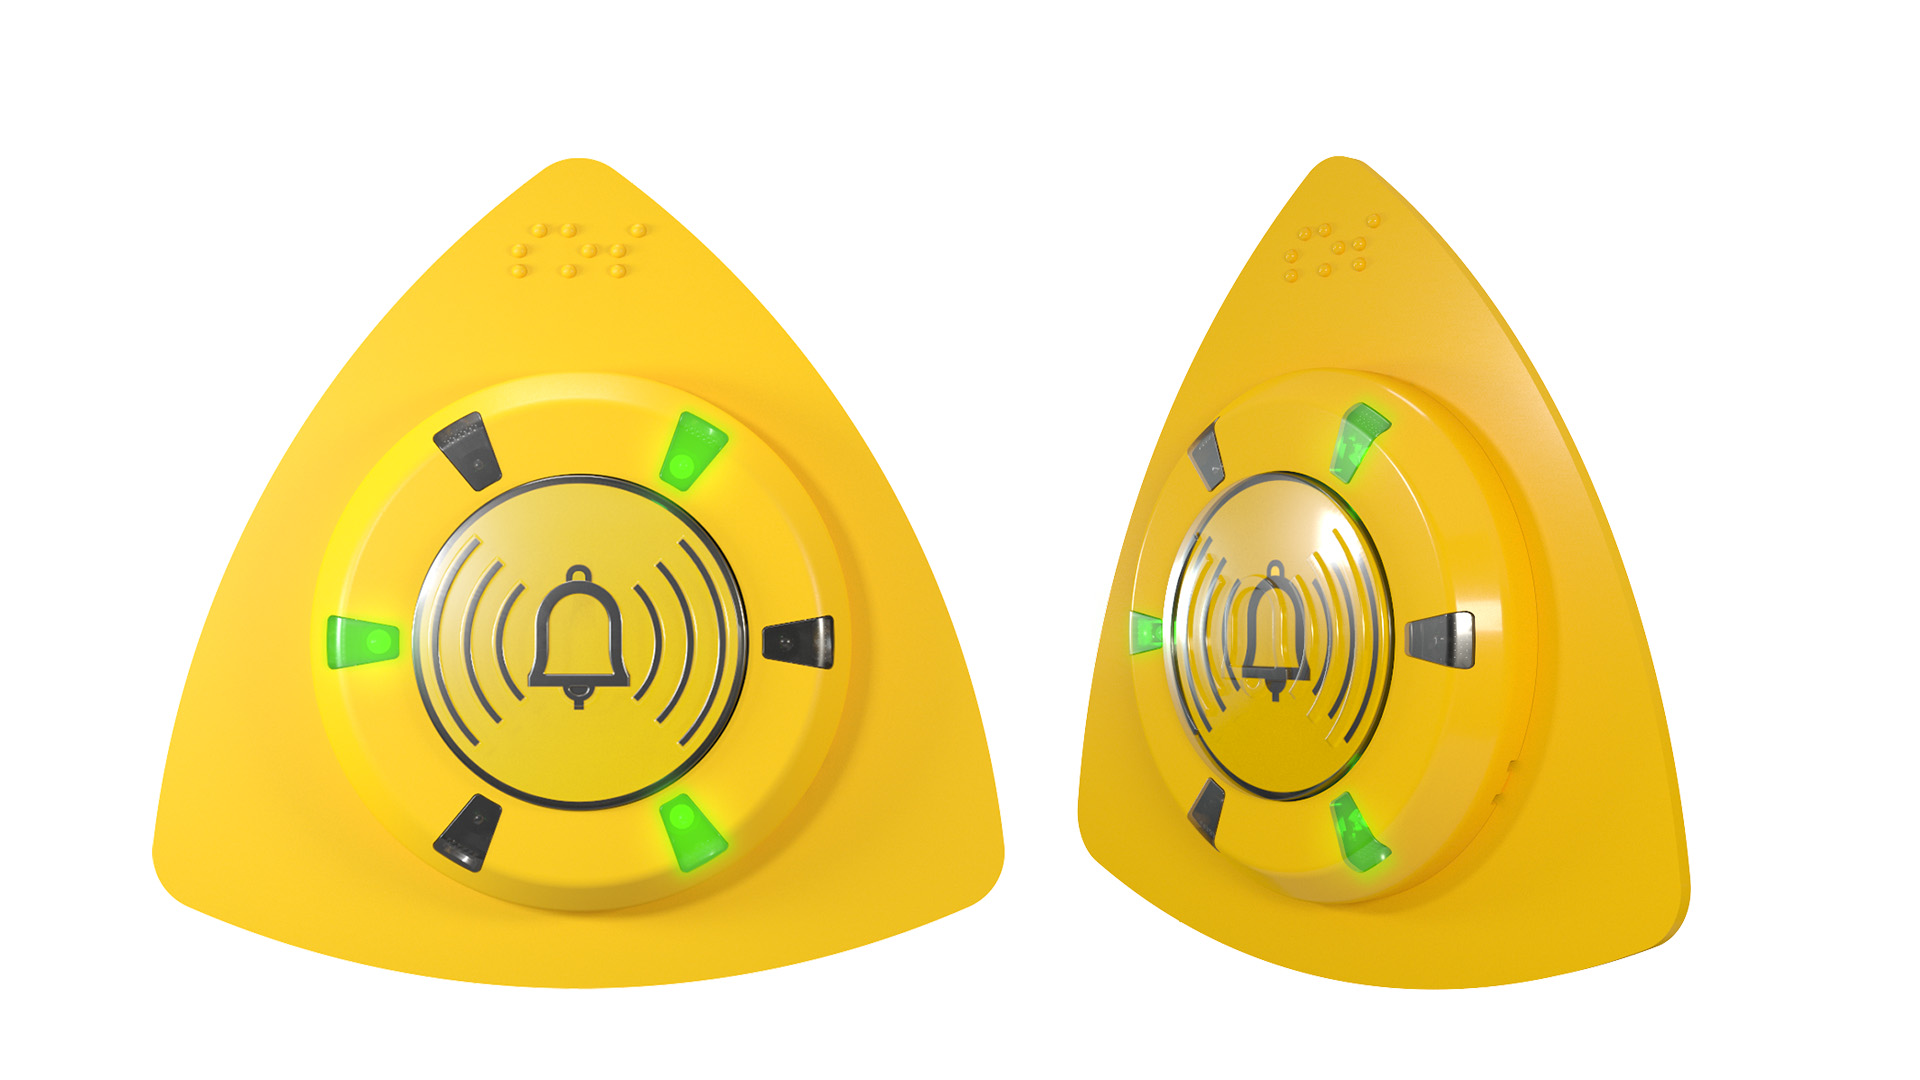 Update PK52 and CK92 call for aid push buttons